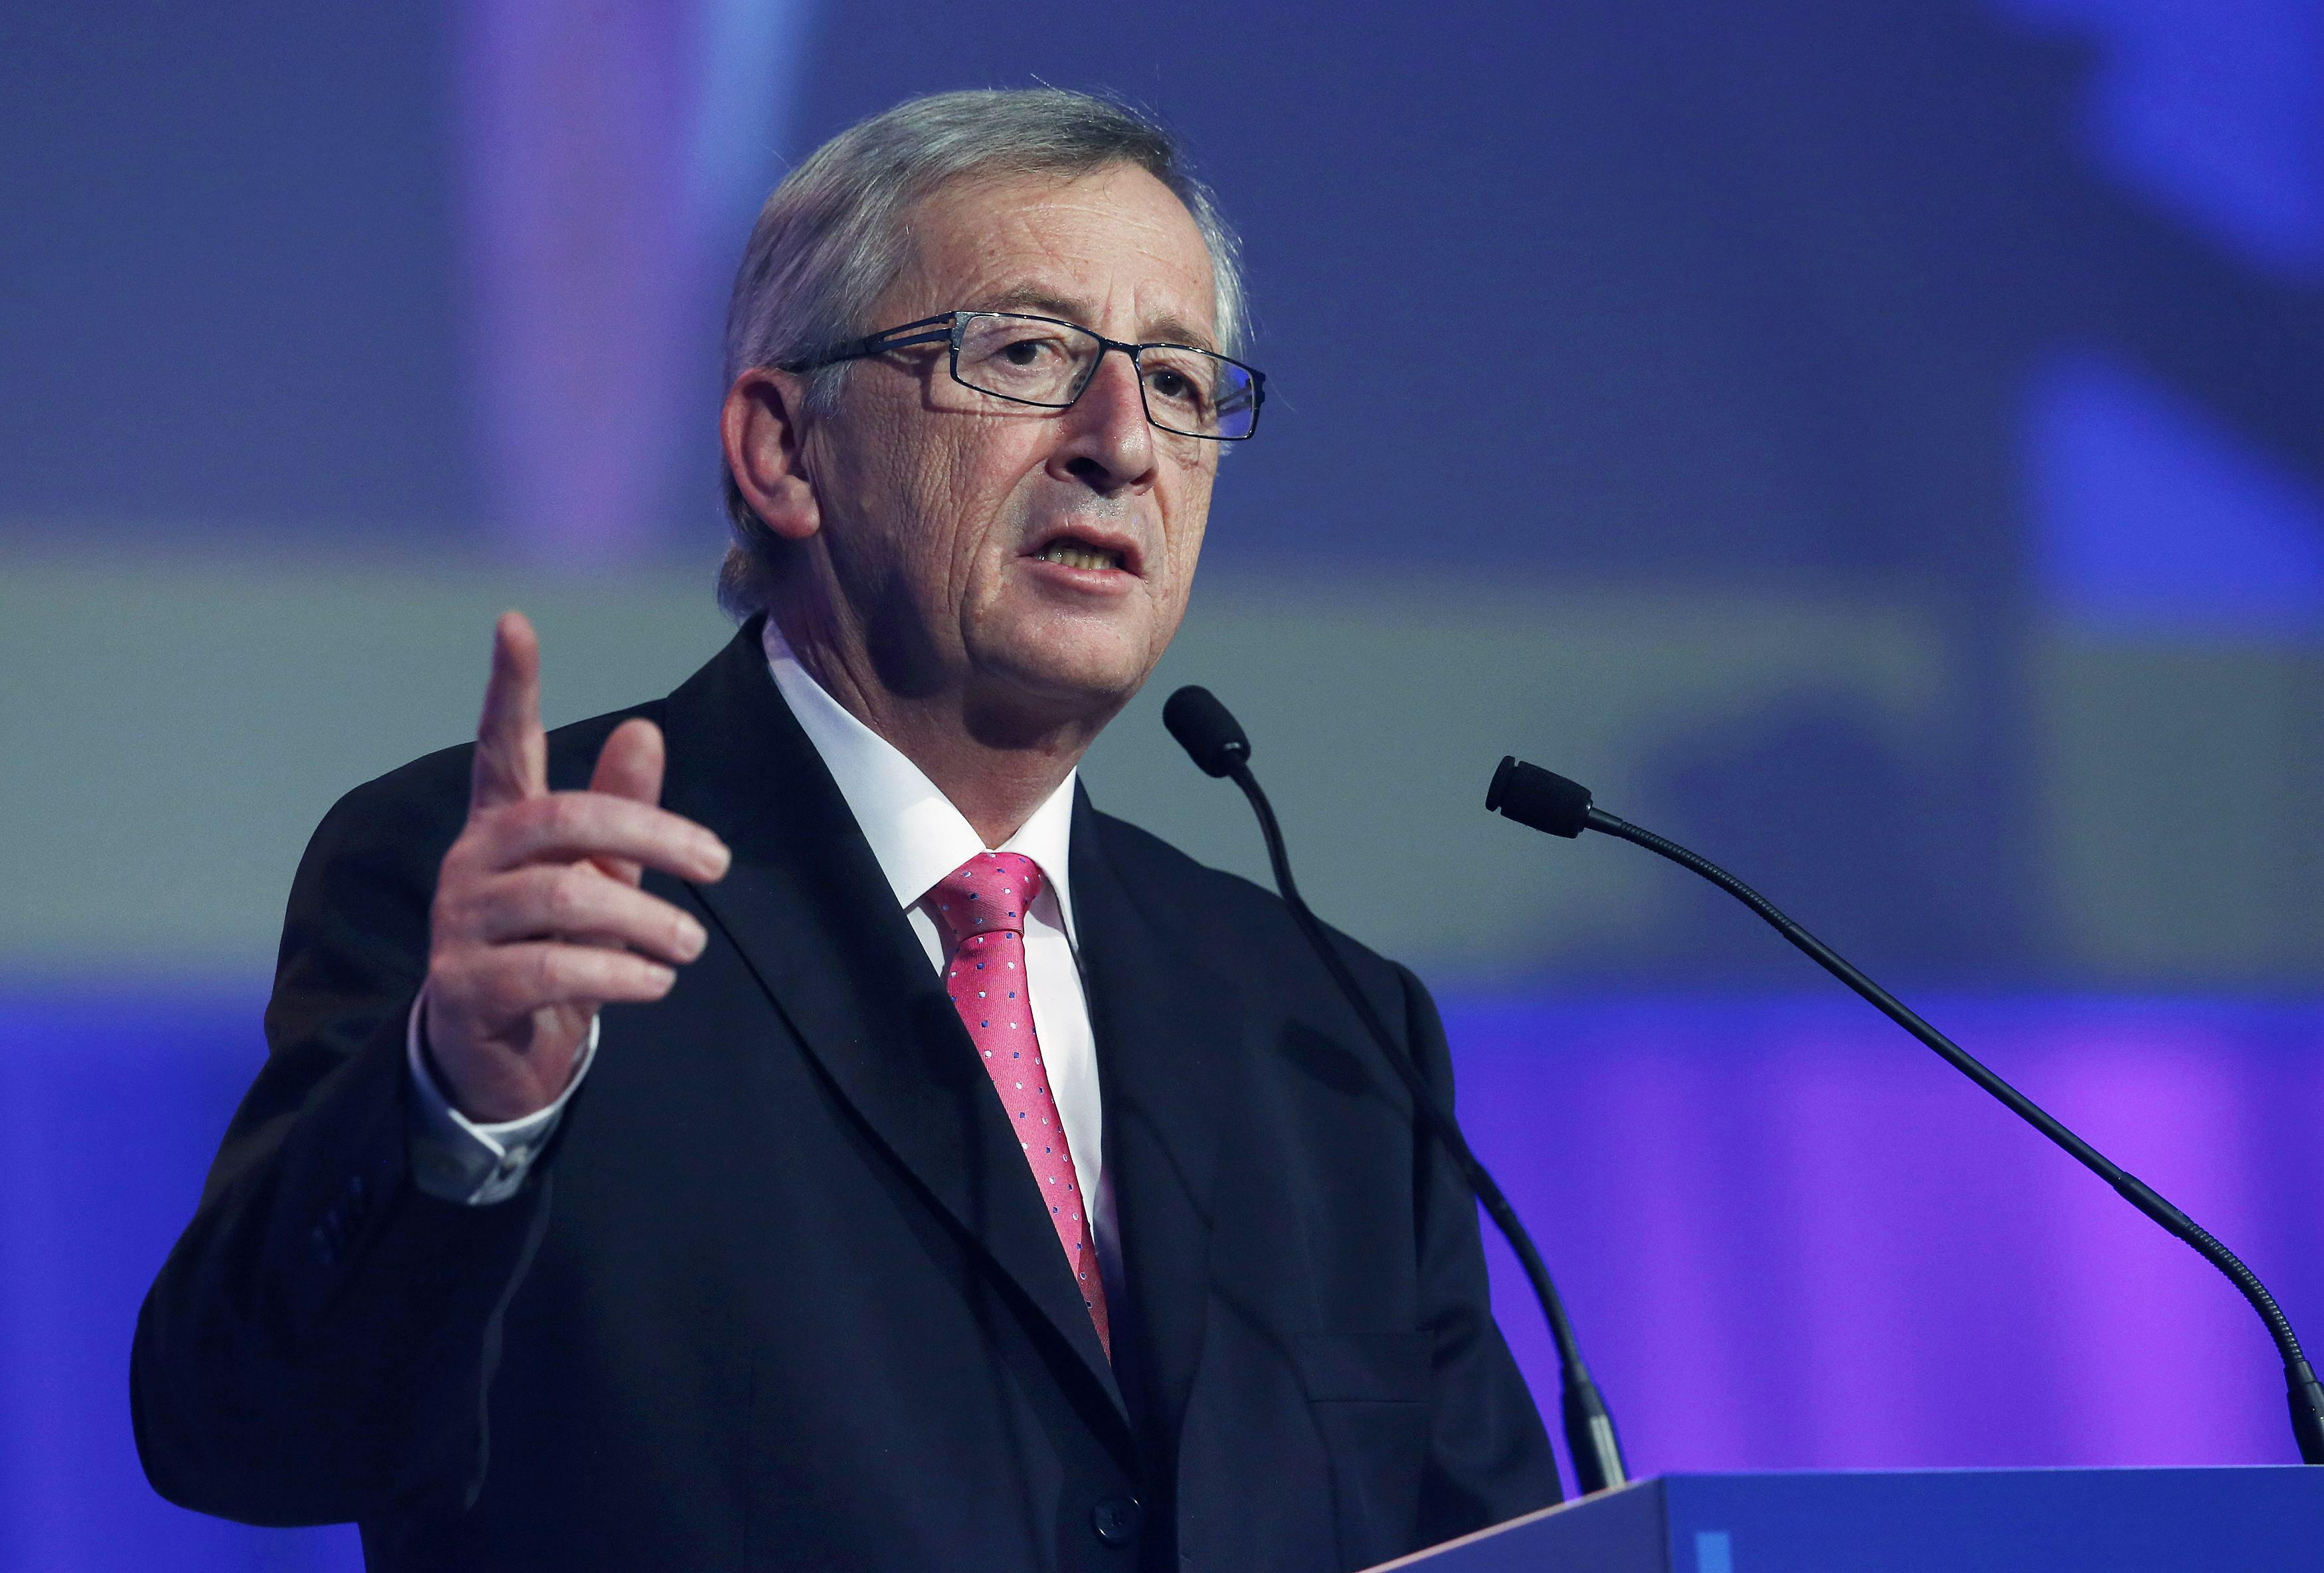 No other countries will quit European Union after Britain: EU chief Juncker